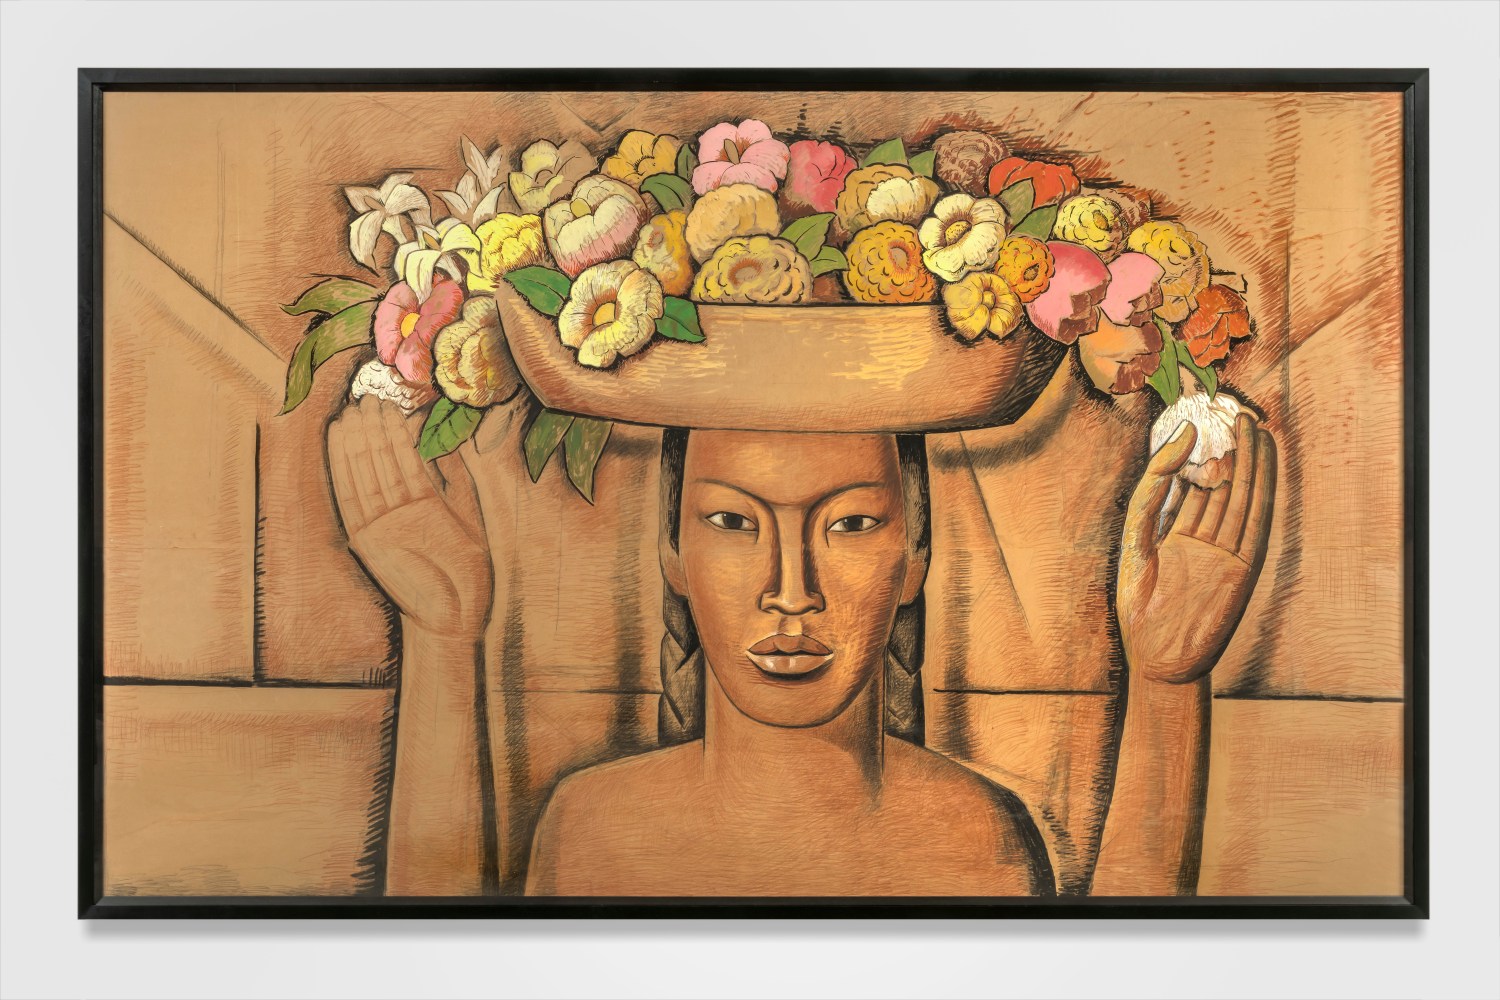 Alfredo Ramos Martínez (1871-1946)  Mural Study for Vendedoras de Flores (Scripps College), c. 1945   Conté crayon and tempera on butcher paper mounted on nonwoven polyester sheet  87 x 138 inches;  221 x 350.5 centimeters LSFA# 14731